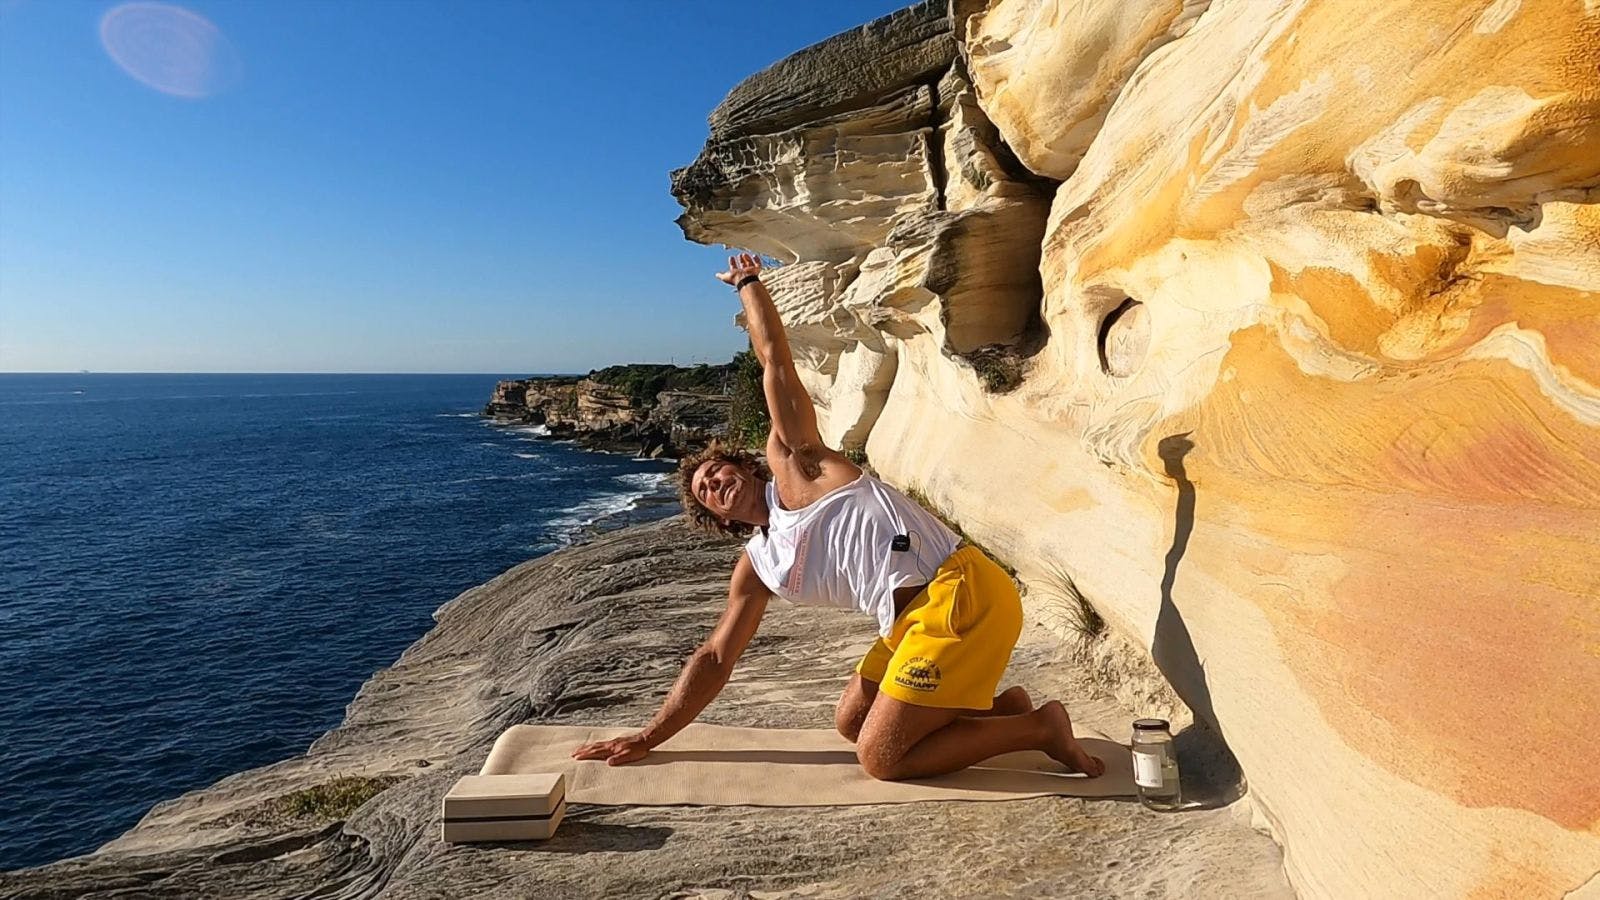 Sunrise Yoga By The Ocean with Christian Ralston